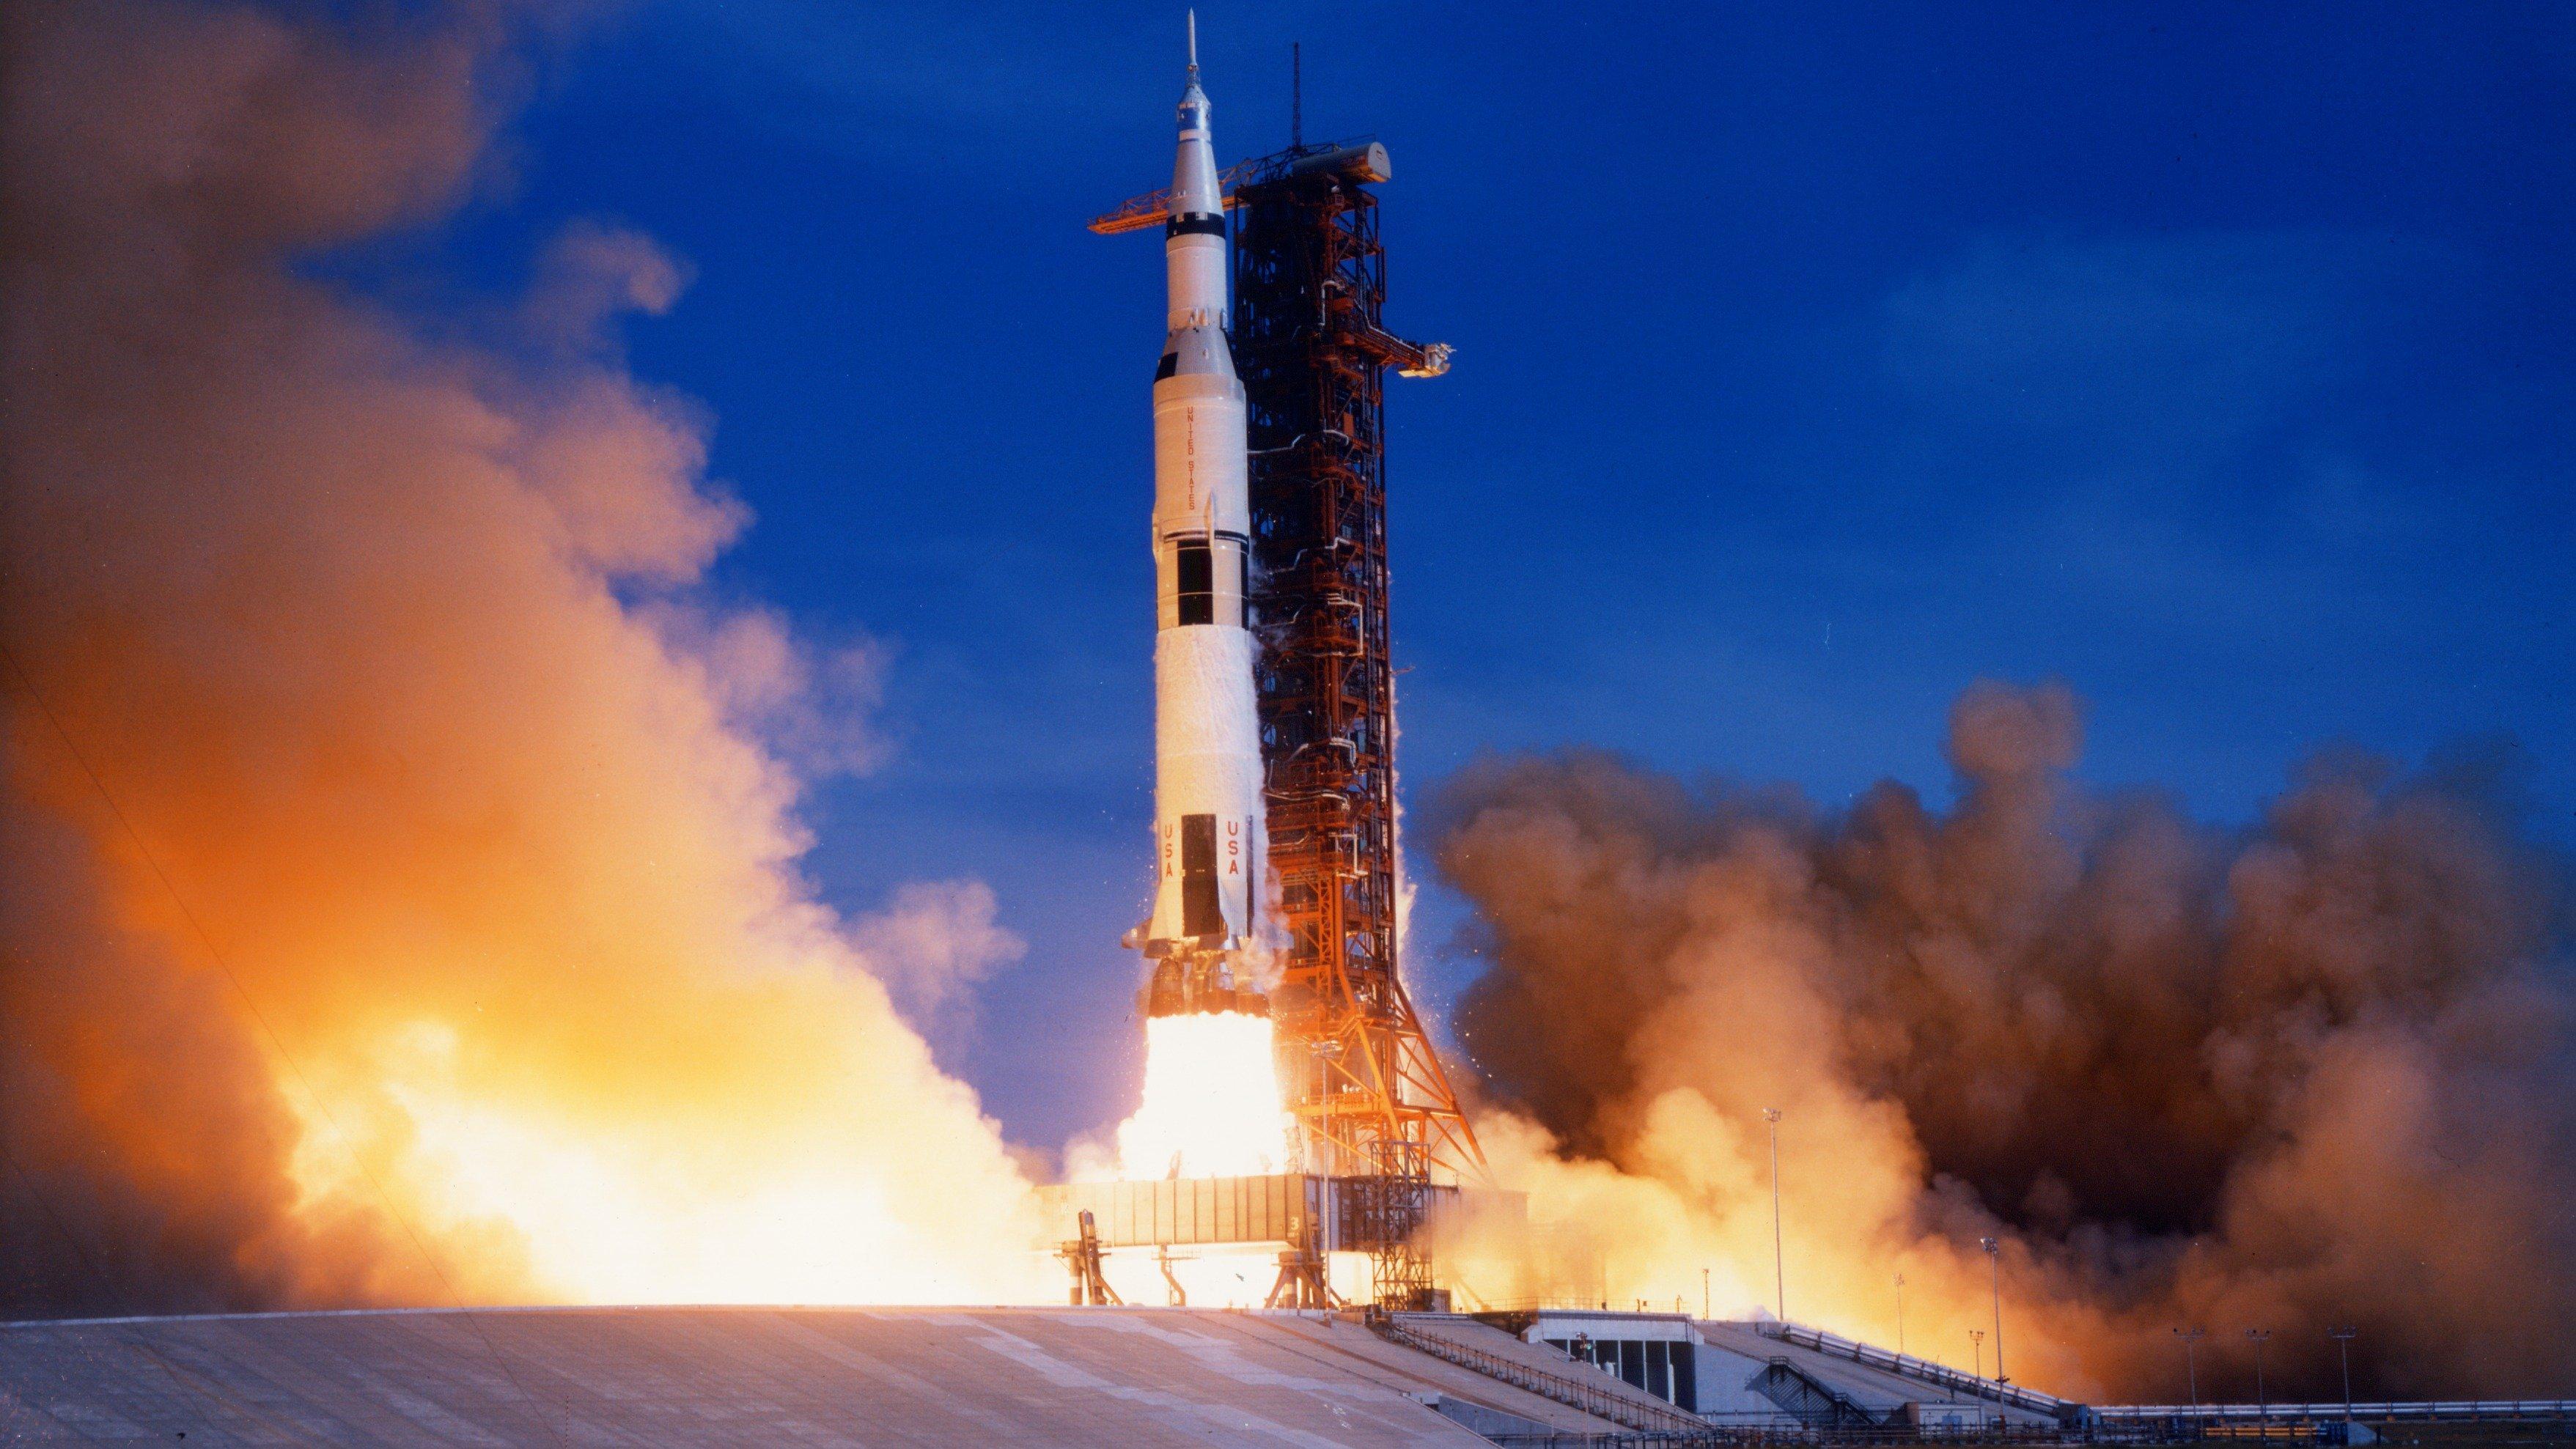 Nasa Saturn V Launch Wallpaper Pics About Space